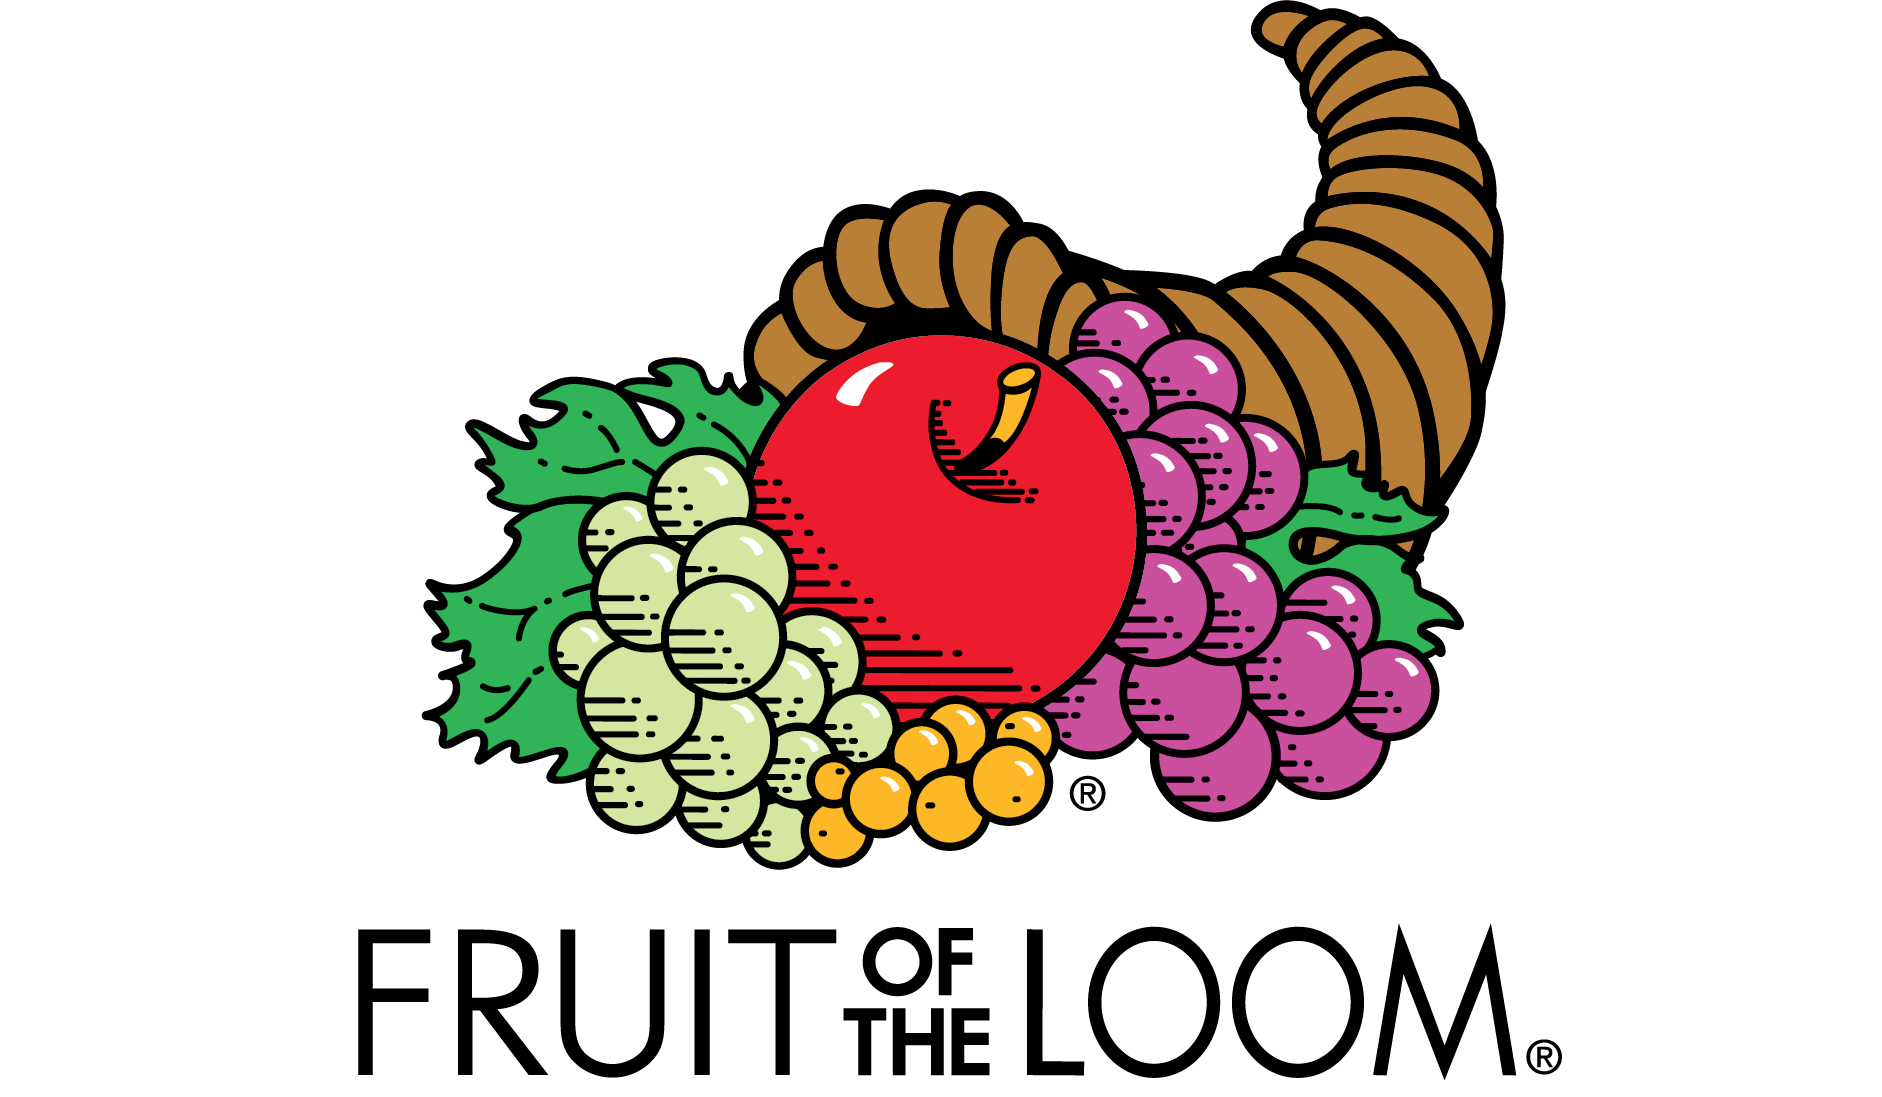 RE: POLL: The Fruit of the Loom logo